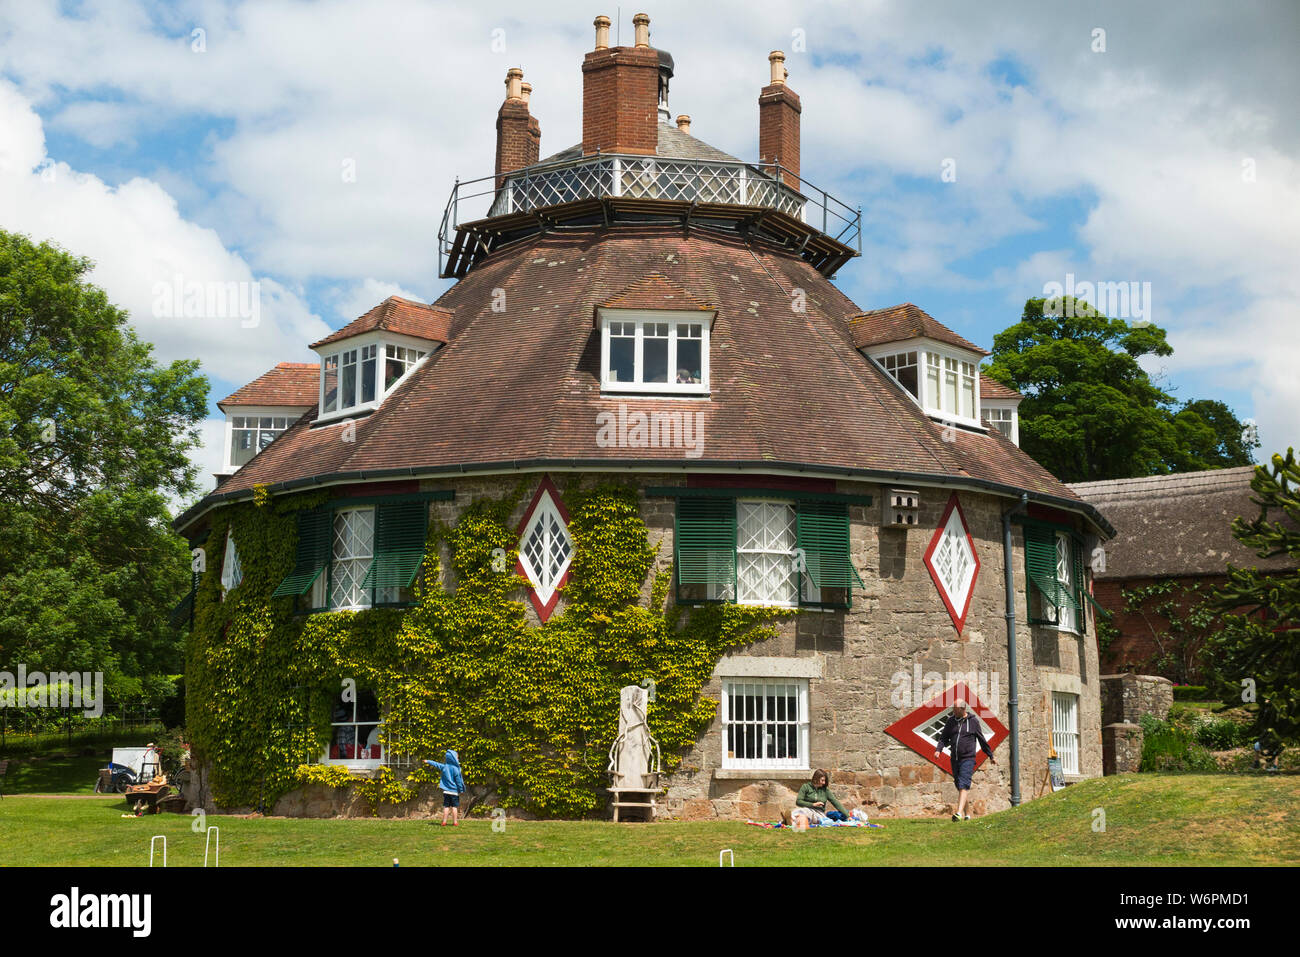 View of the outside exterior of A La Ronde – an 18th-century 16-sided house located near Lympstone, Exmouth, Devon UK – from outside / the gardens  (110) Stock Photo